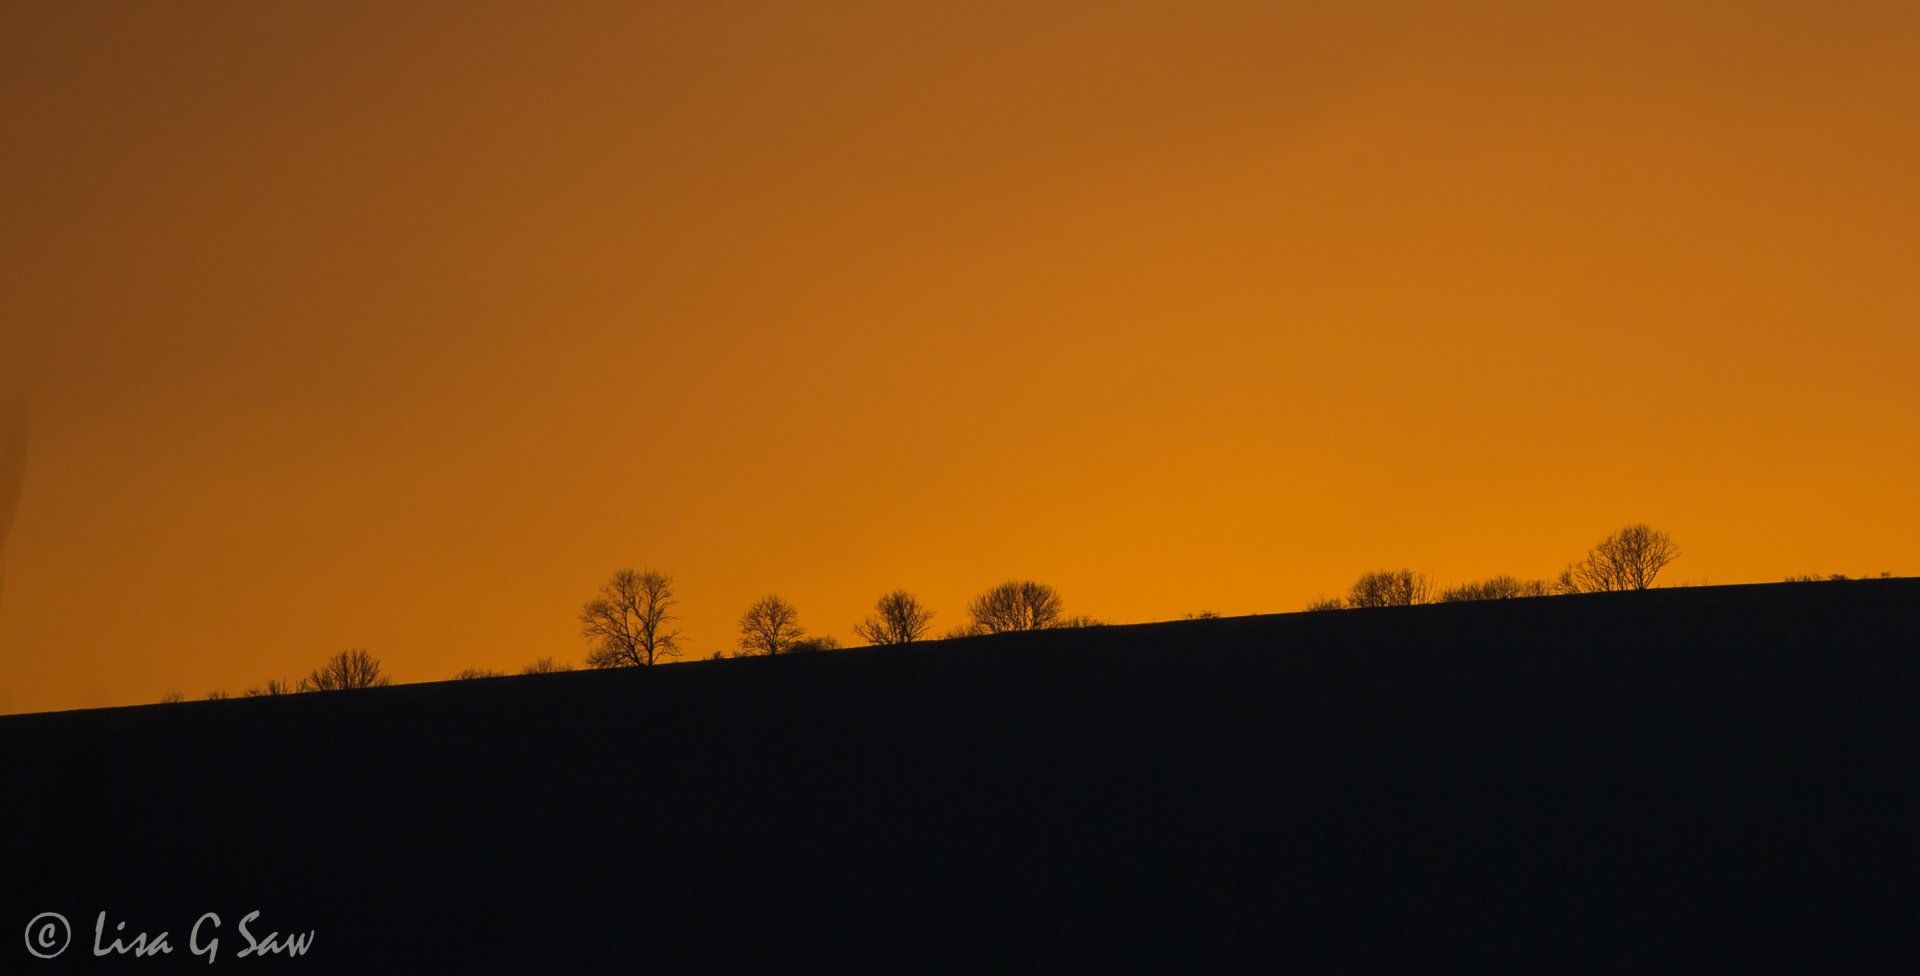 Silhouette of bare trees on hill in autumn against orange glow of sunset